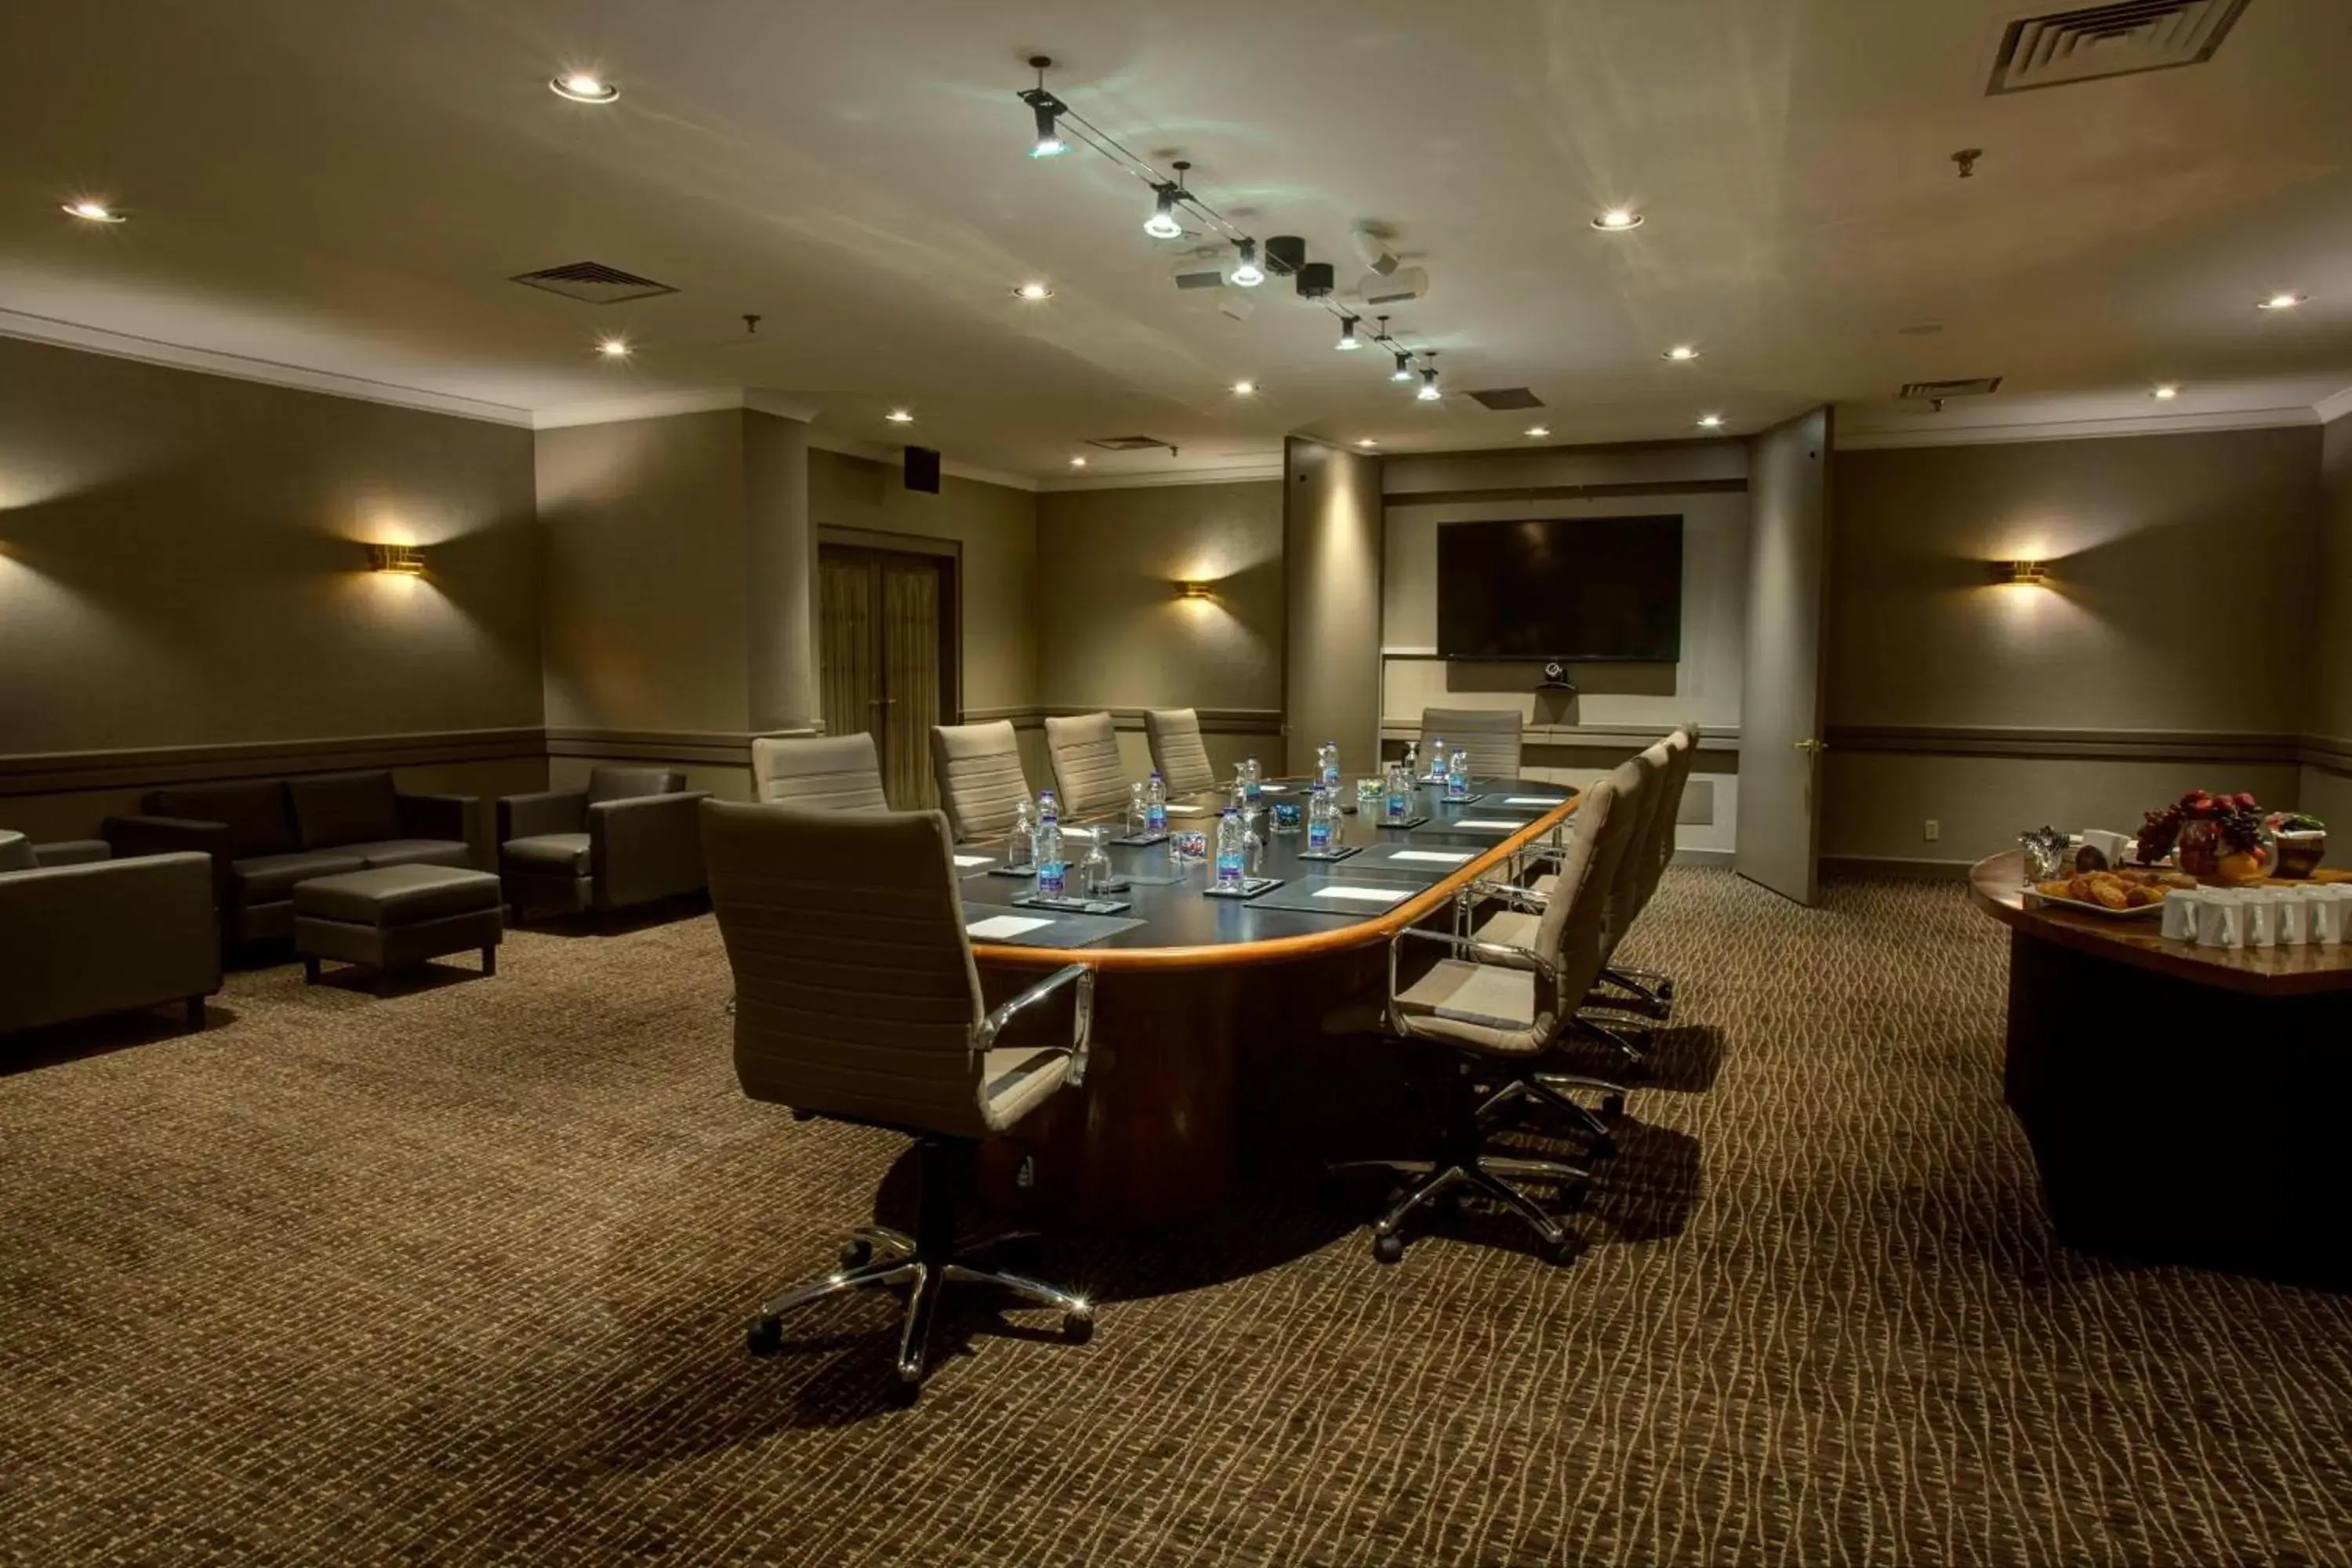 Meeting/conference room in Delta Hotels by Marriott Toronto Airport & Conference Centre